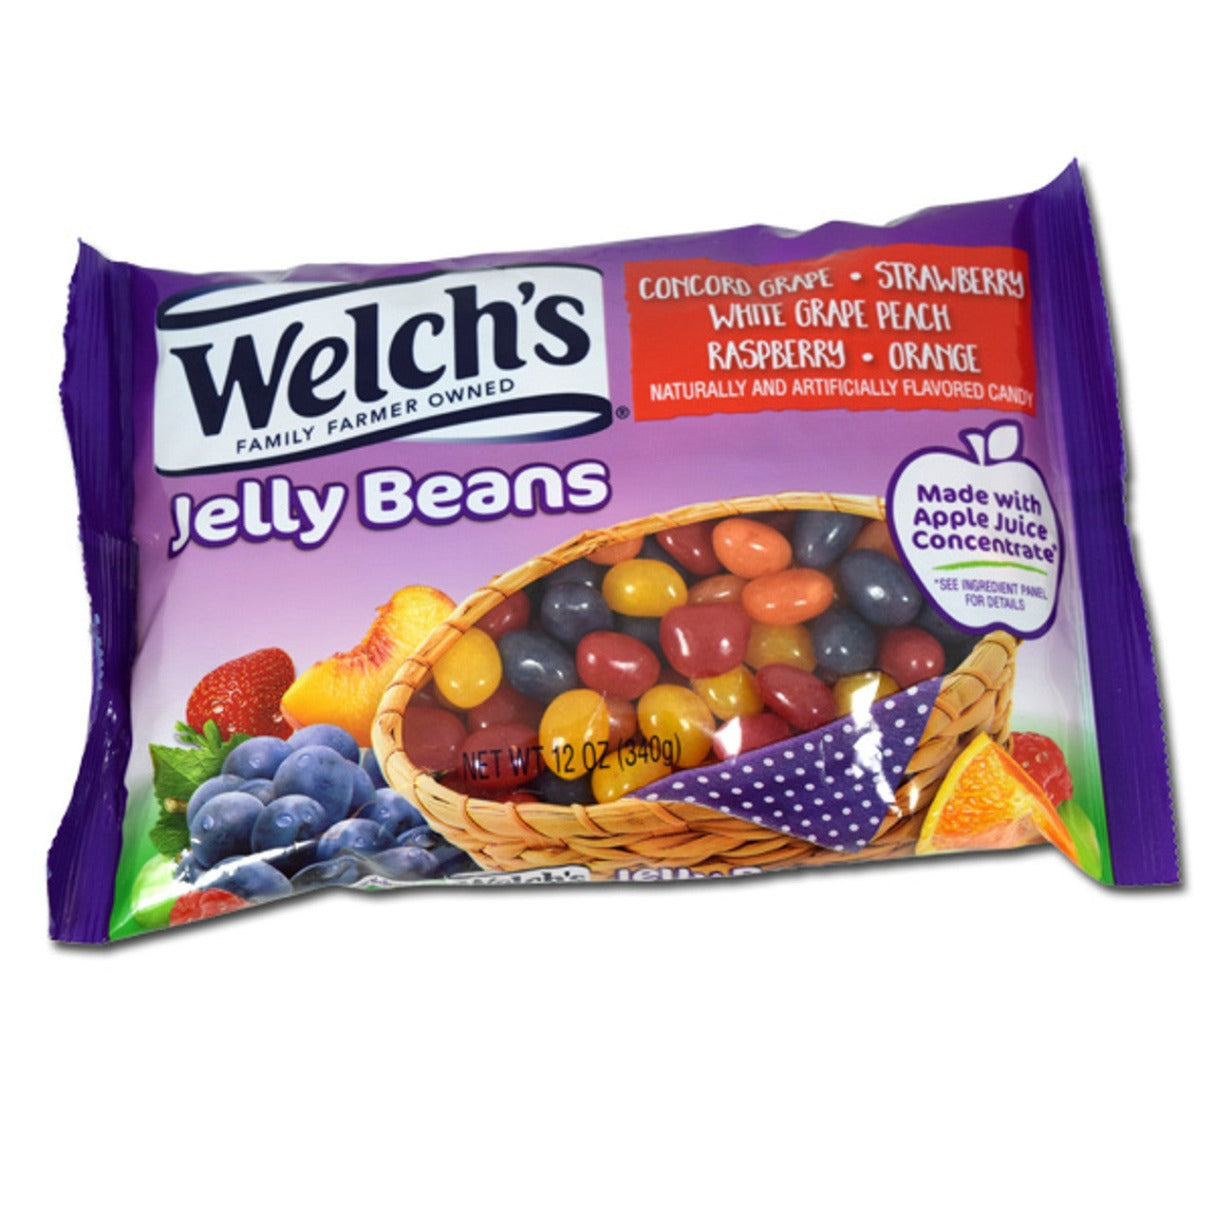 Frankford Welch's Jelly Beans Bag 12oz - 12ct